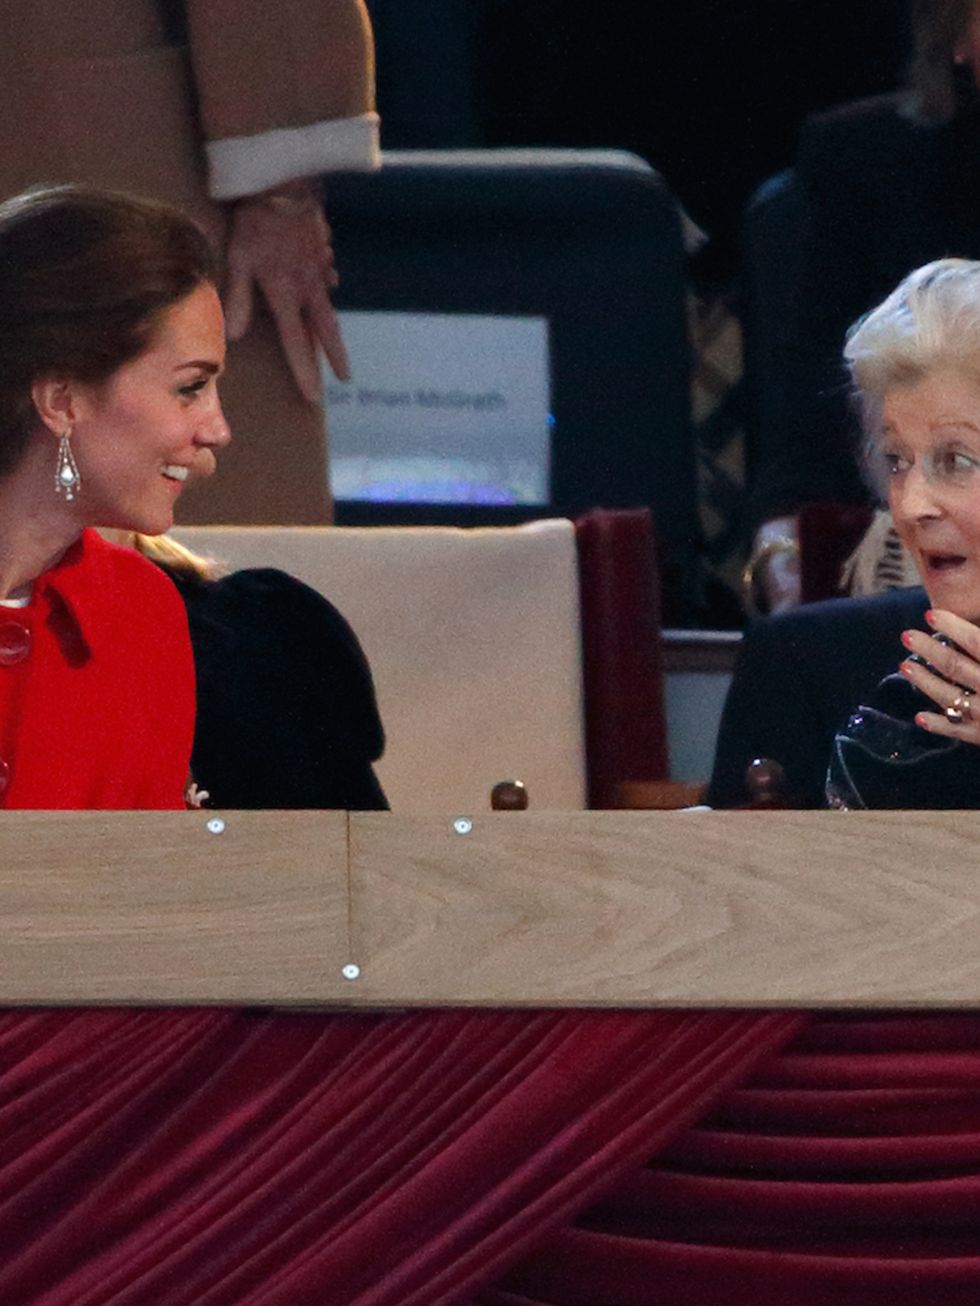 Kate Middleton made everyone gasp and giggle, it would seem. Goodness only knows what she said to Princess Alexandra.